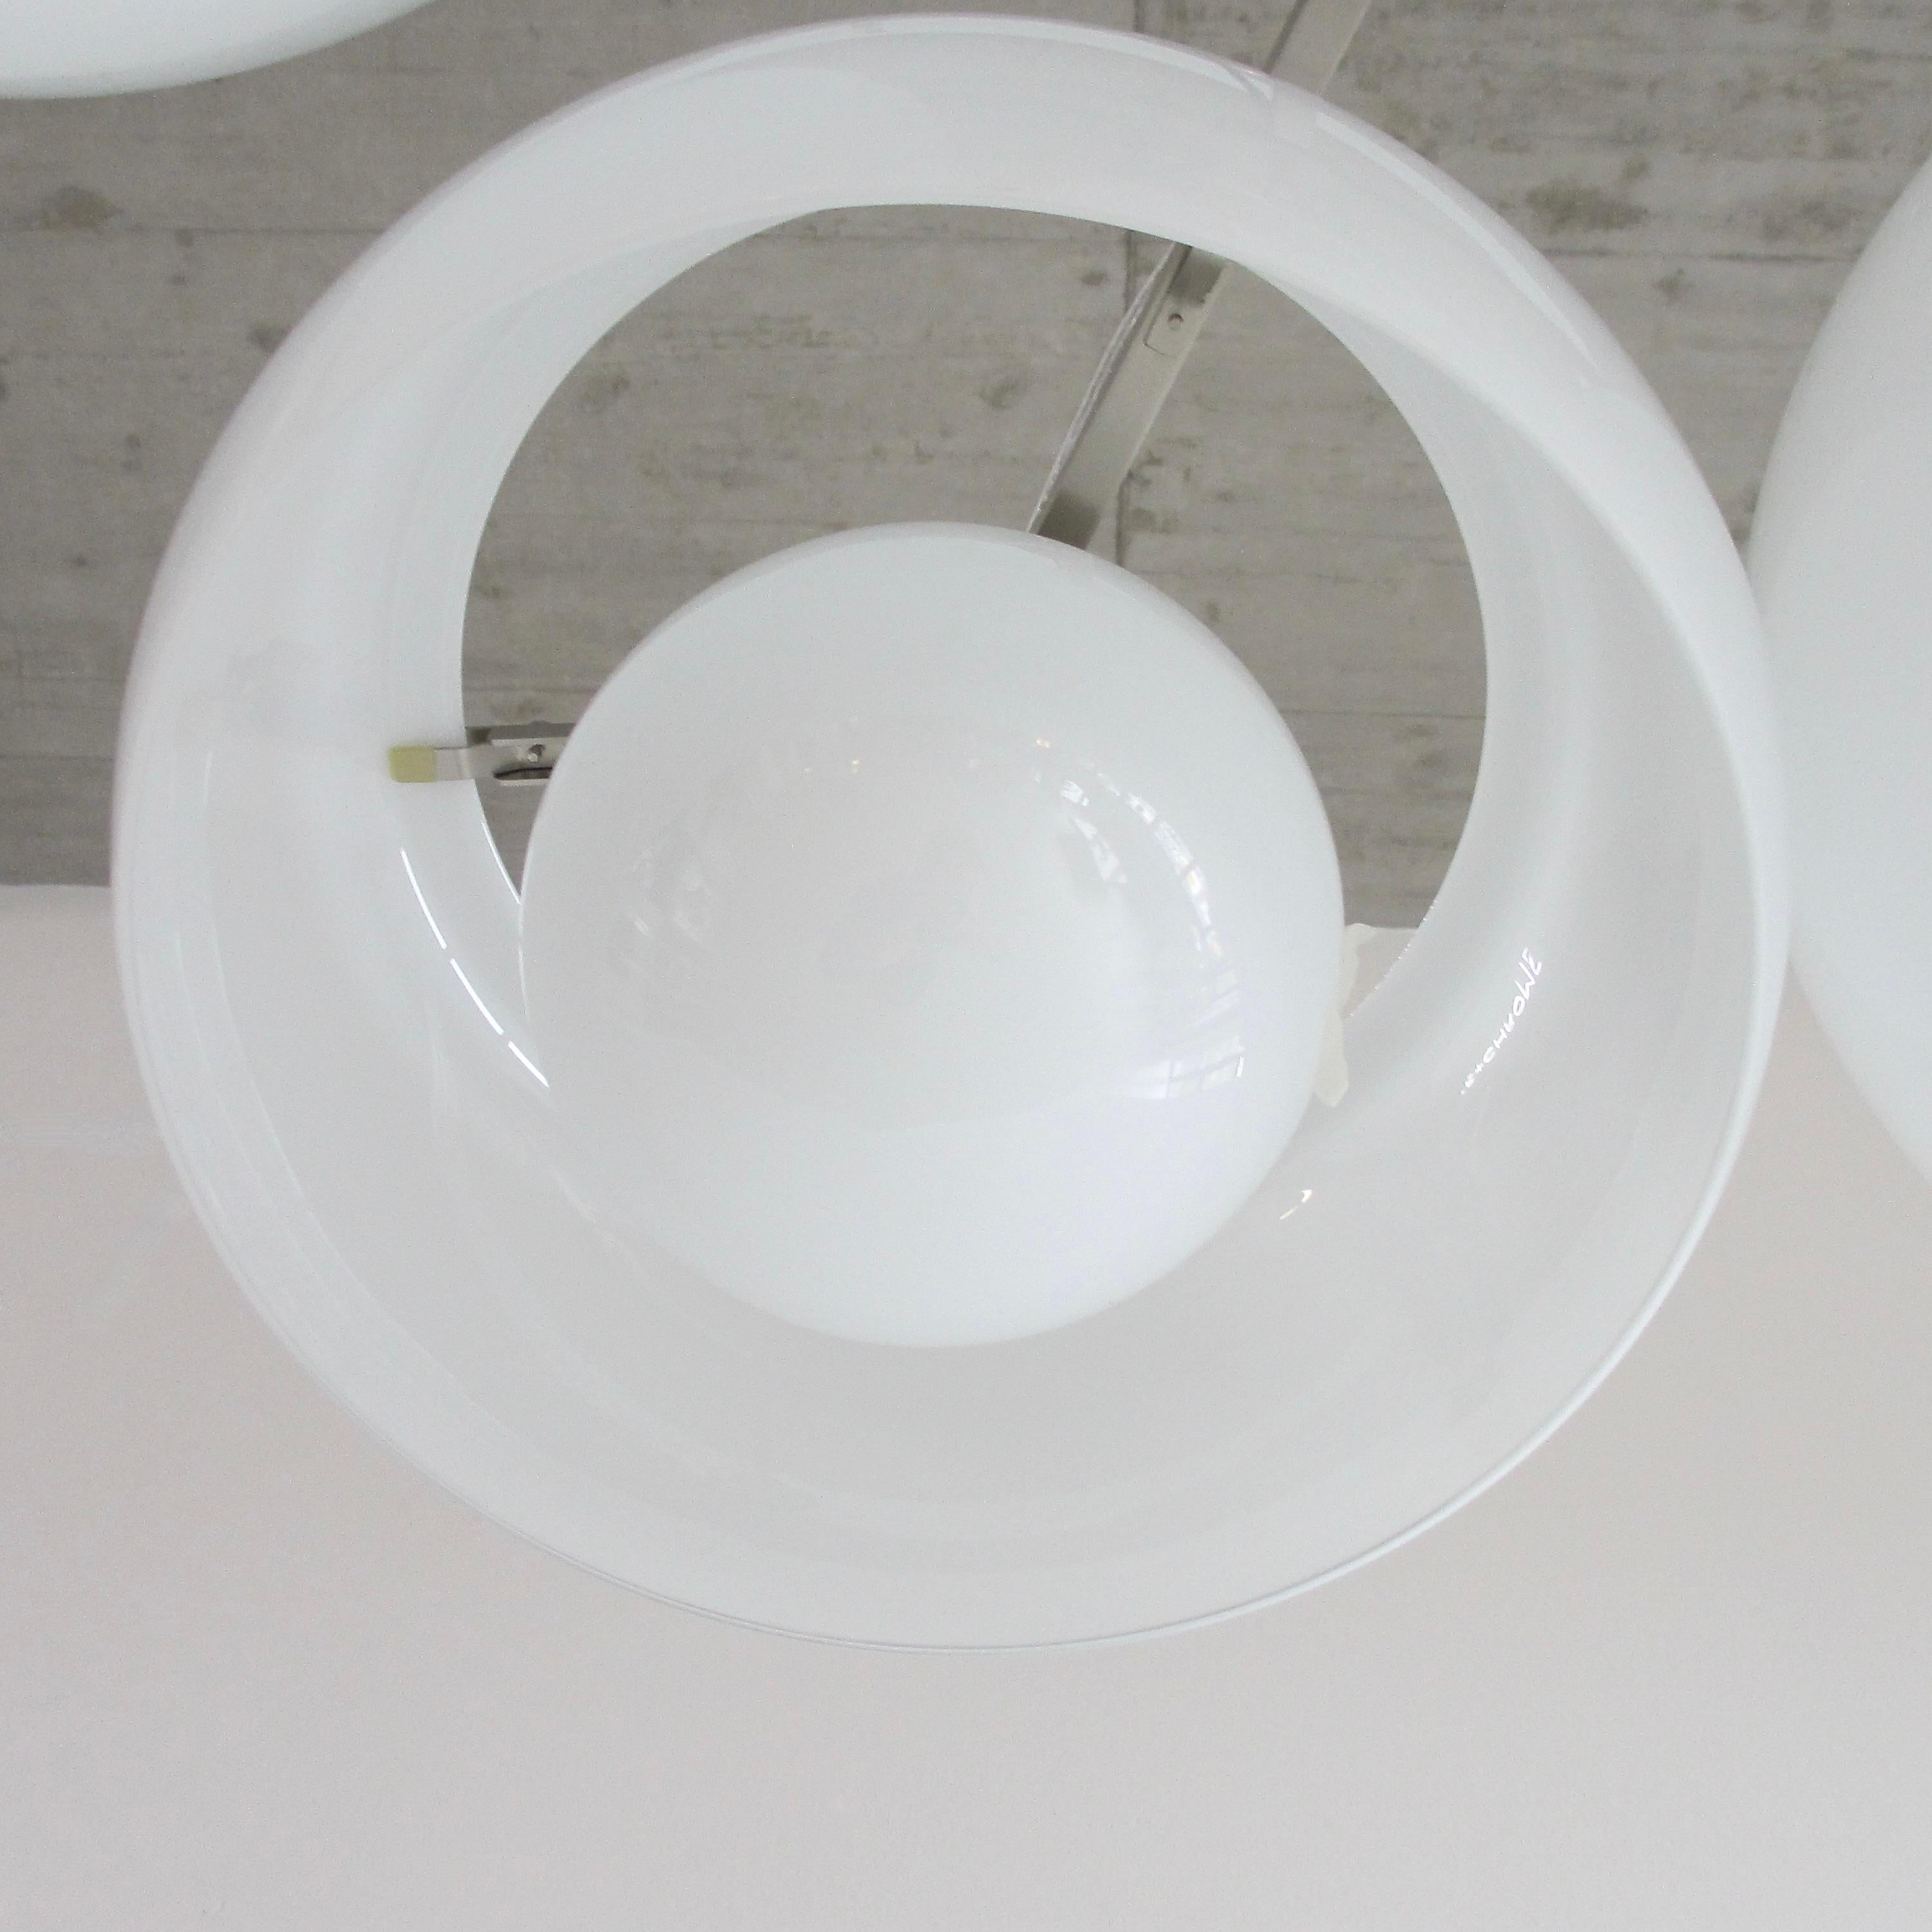 Opaline Glass Large Ceiling Lamp PENTACLINIO, designed by Vico MAGISTRETTI for Artemide, 1961